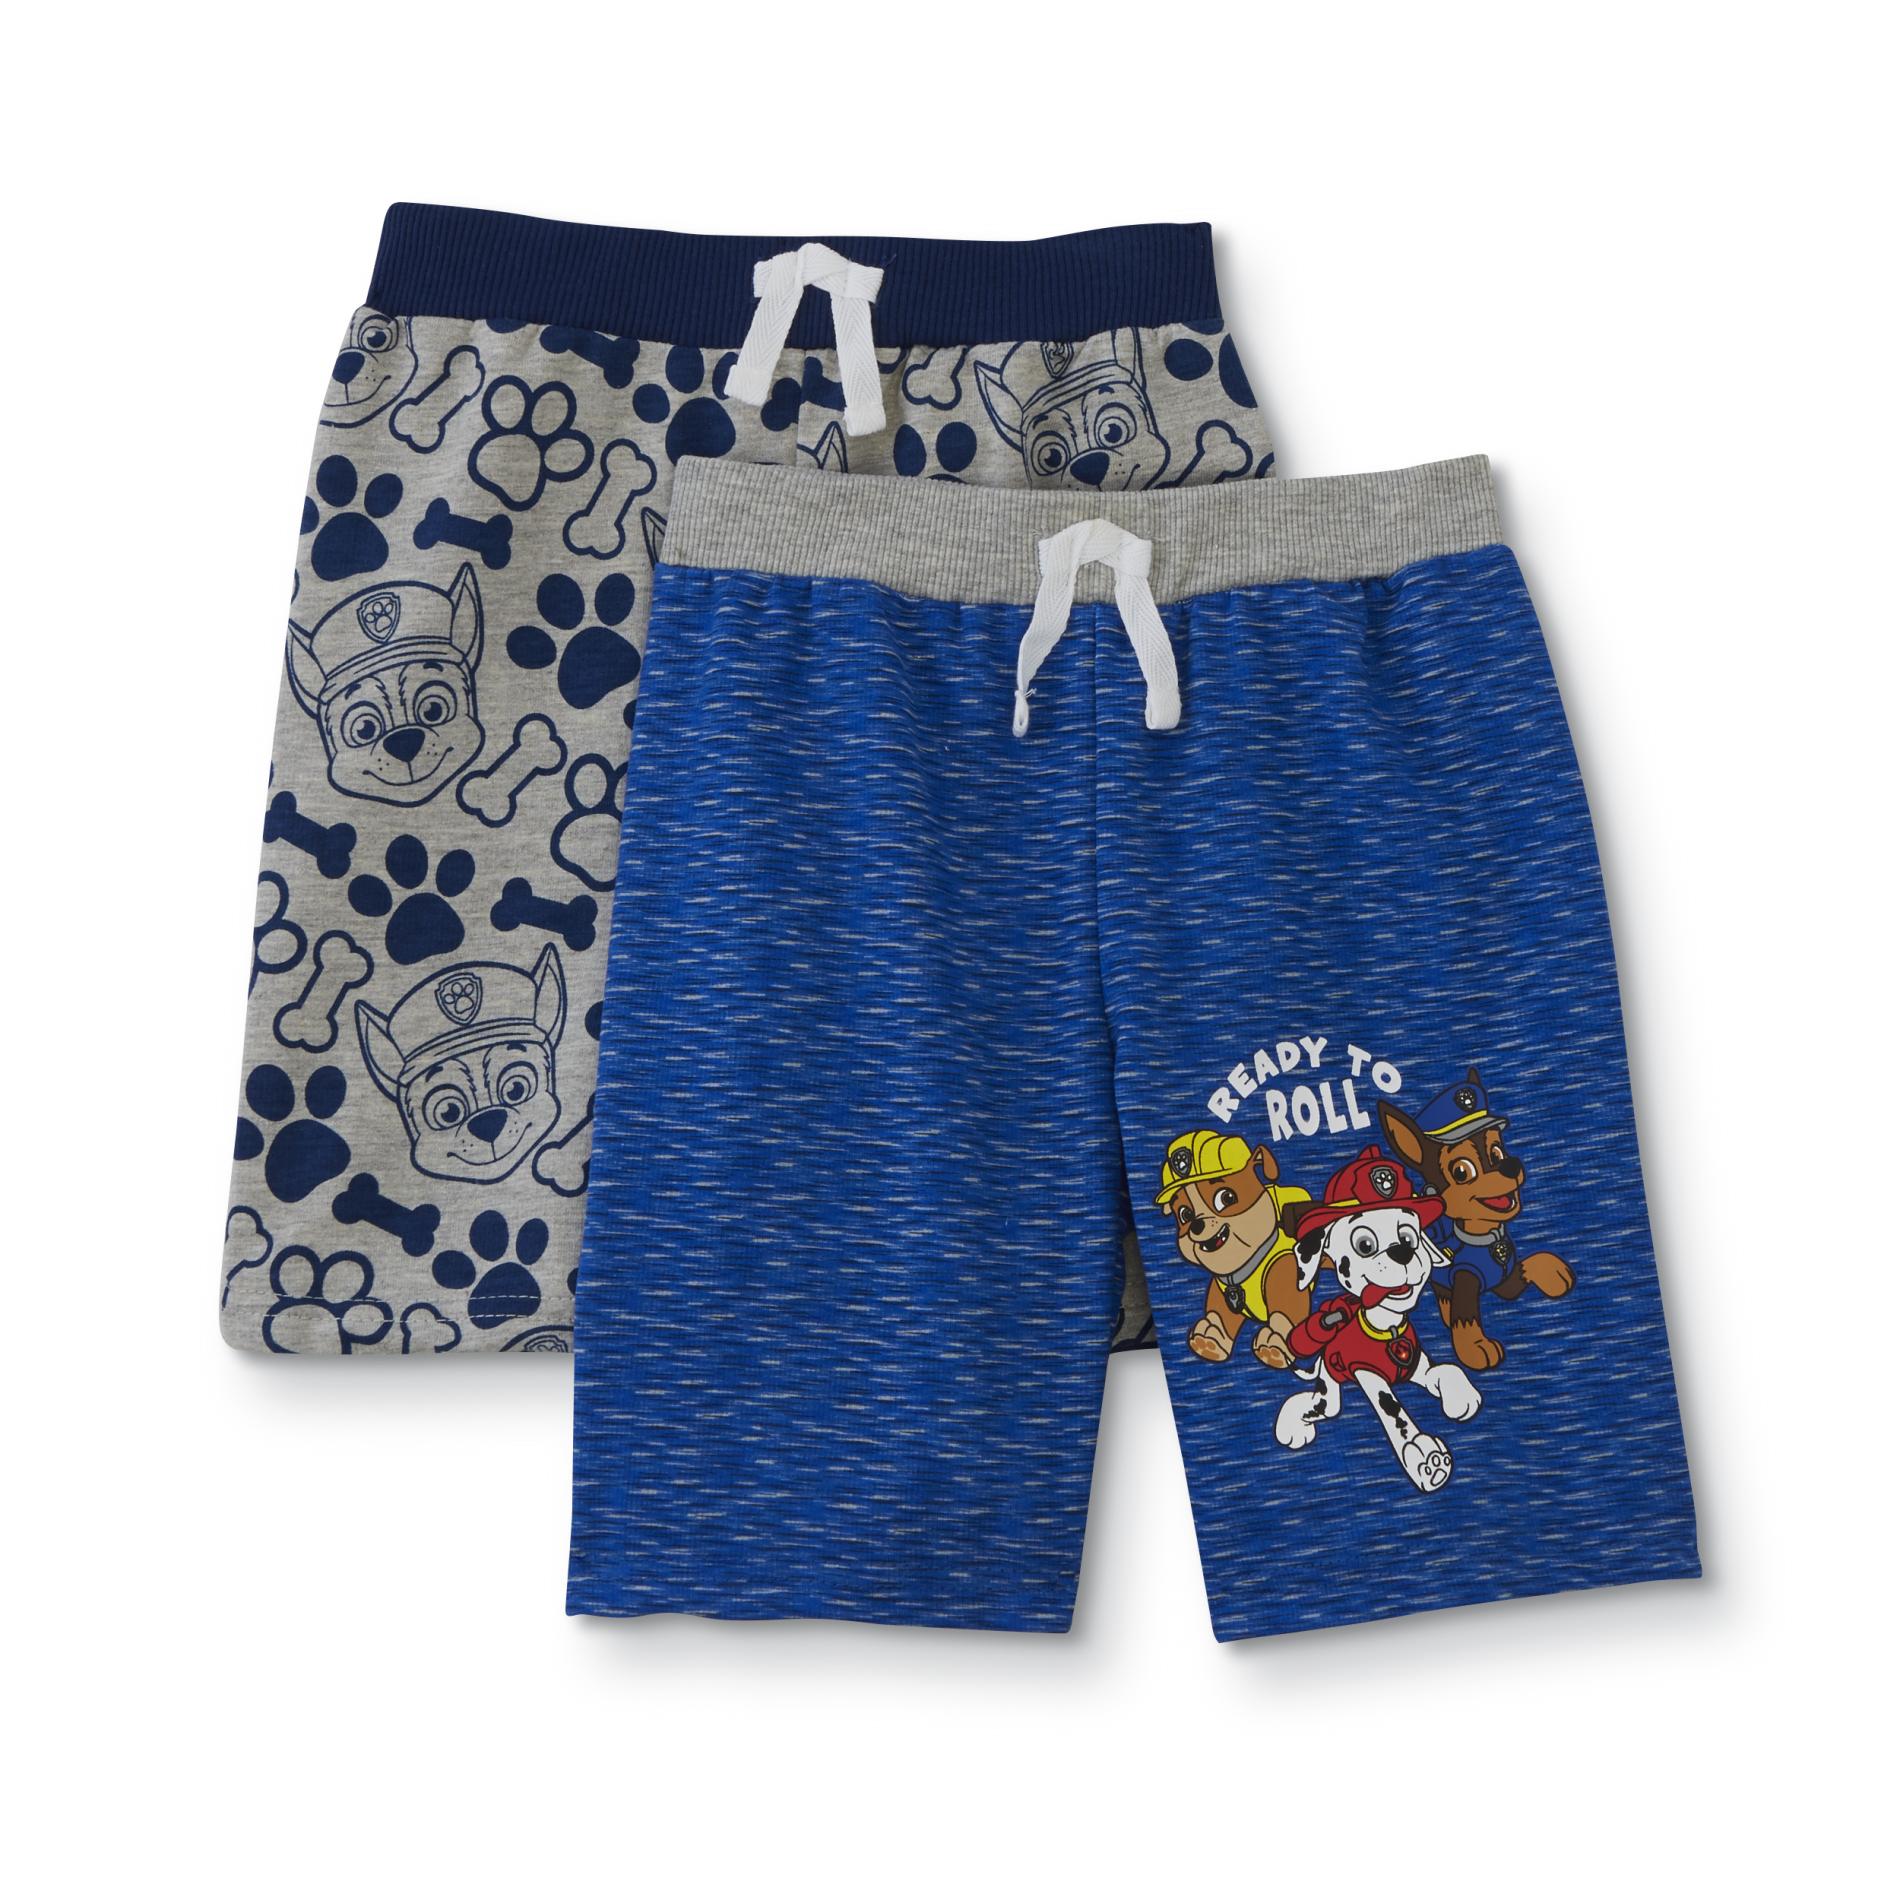 PAW Patrol Toddler Boys' 2-Pack Jogger Shorts - Ready to Roll